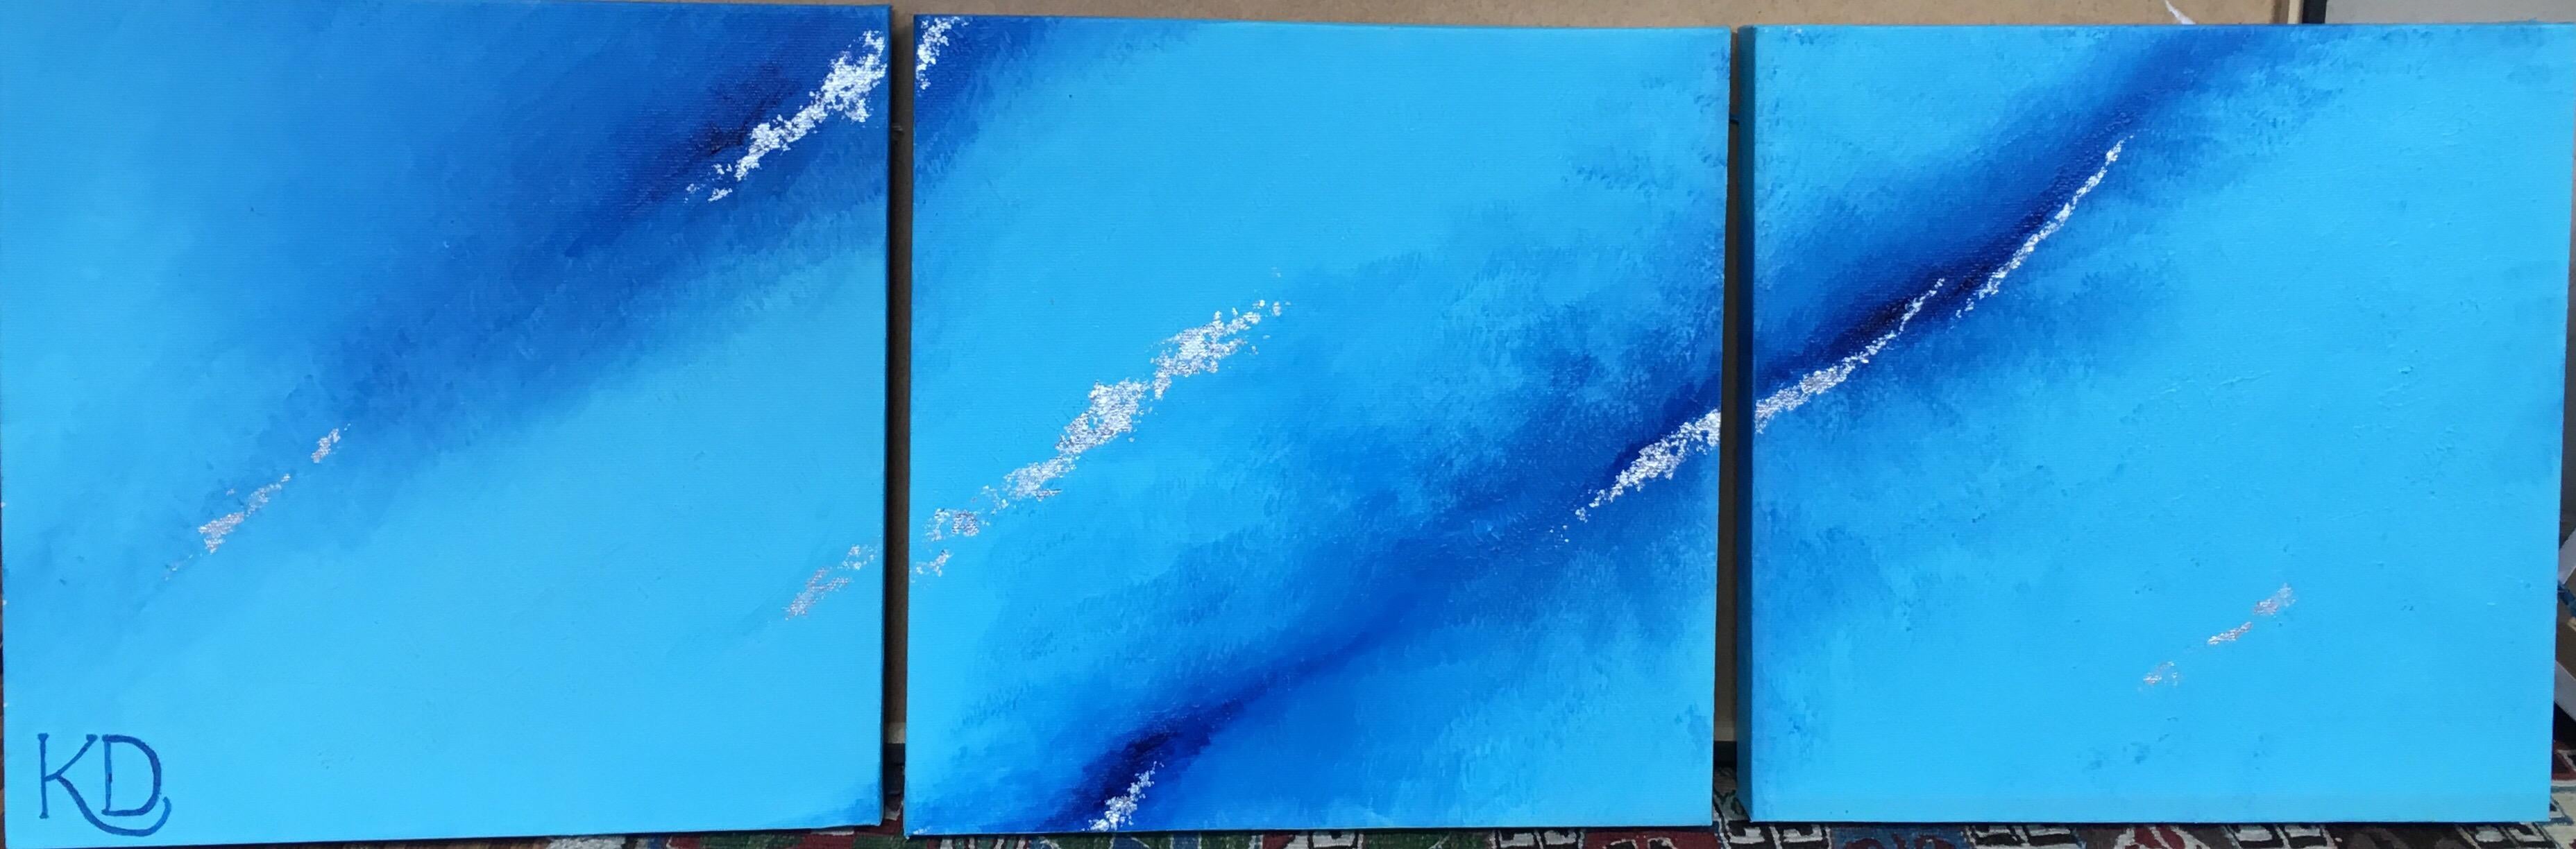 Triptych Sea Blue Oil Paintings 